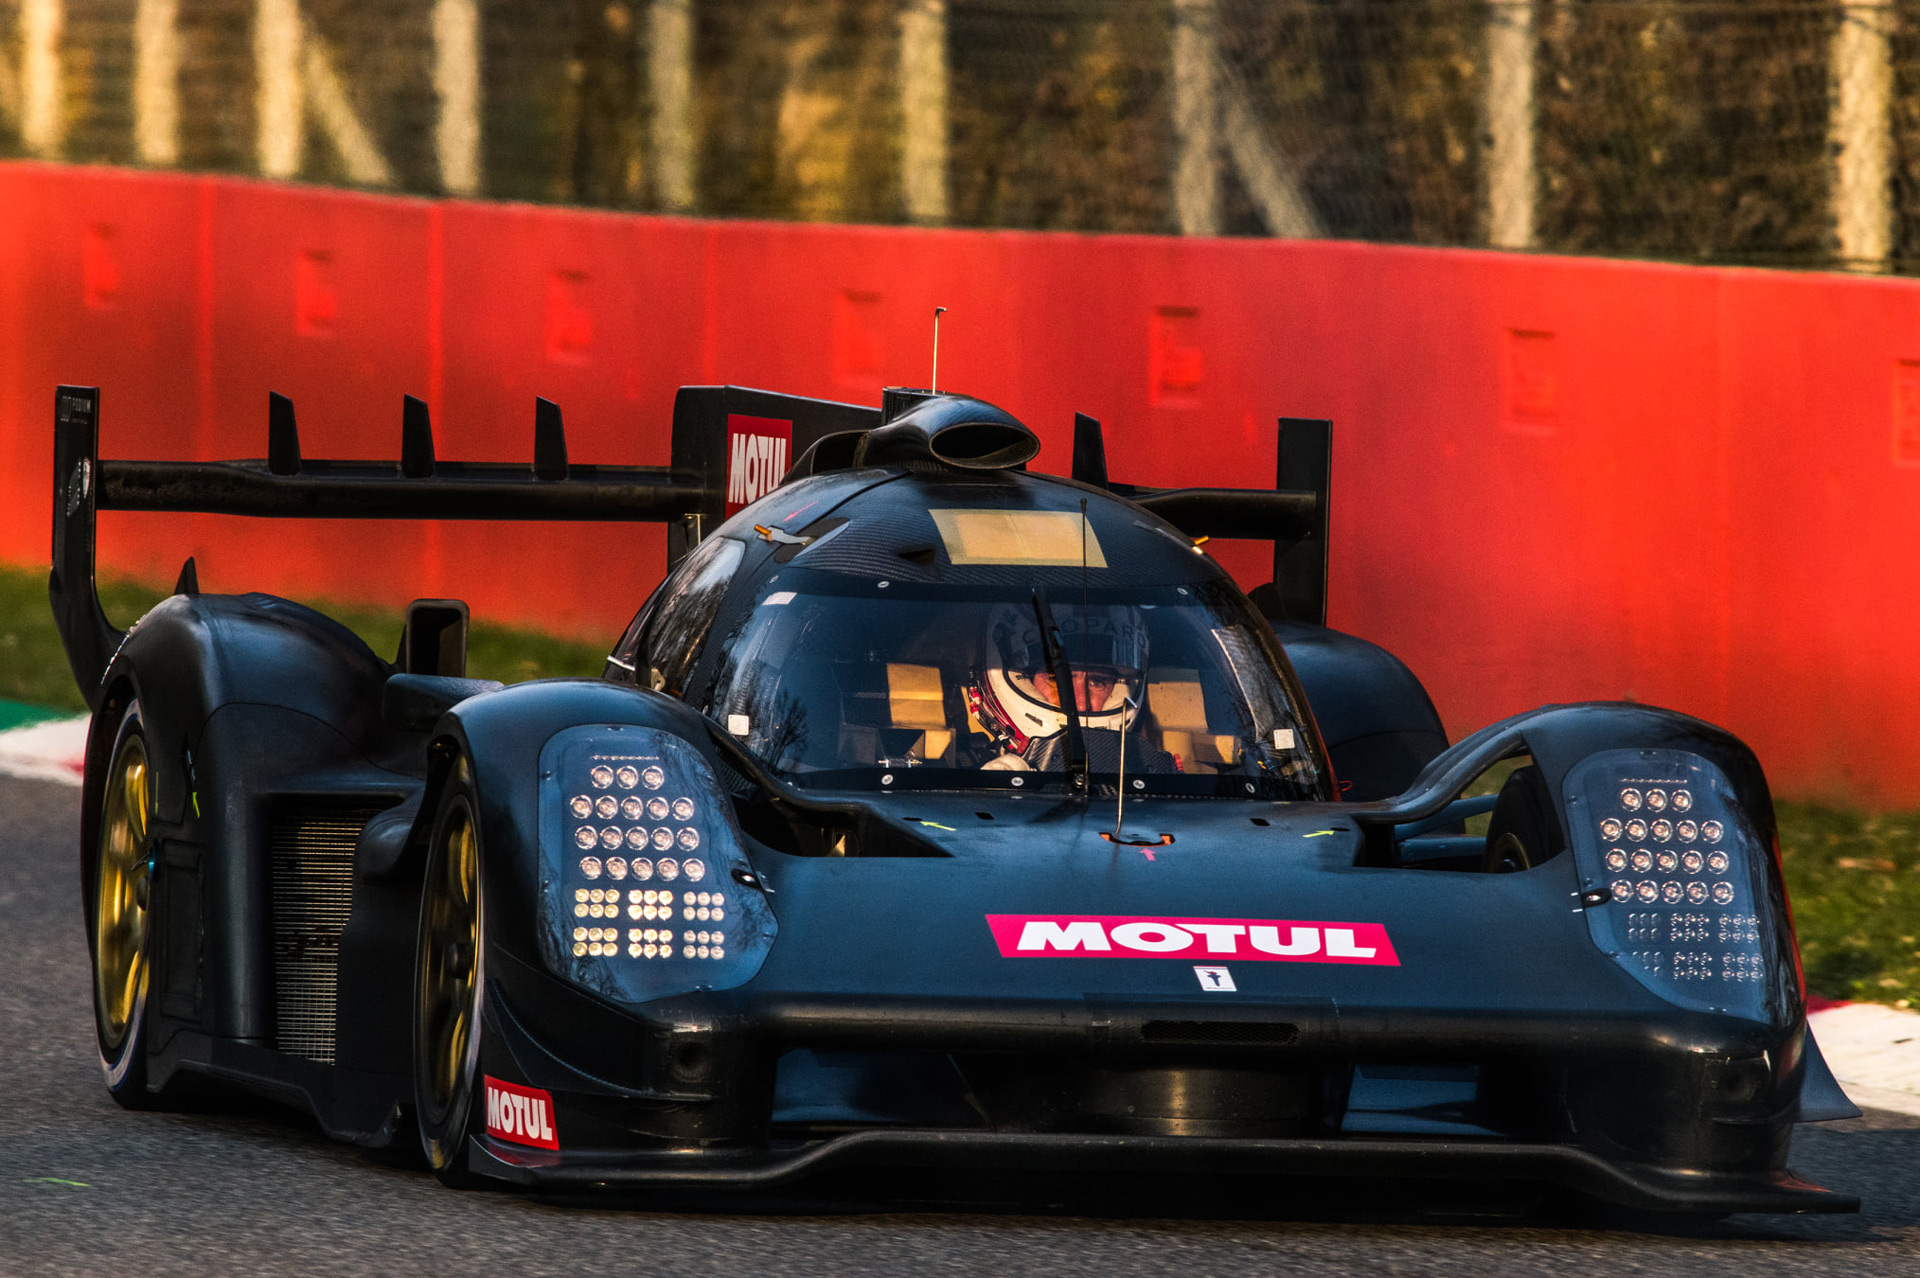 Glickenhaus to race one car in the 8 hours of Portimao